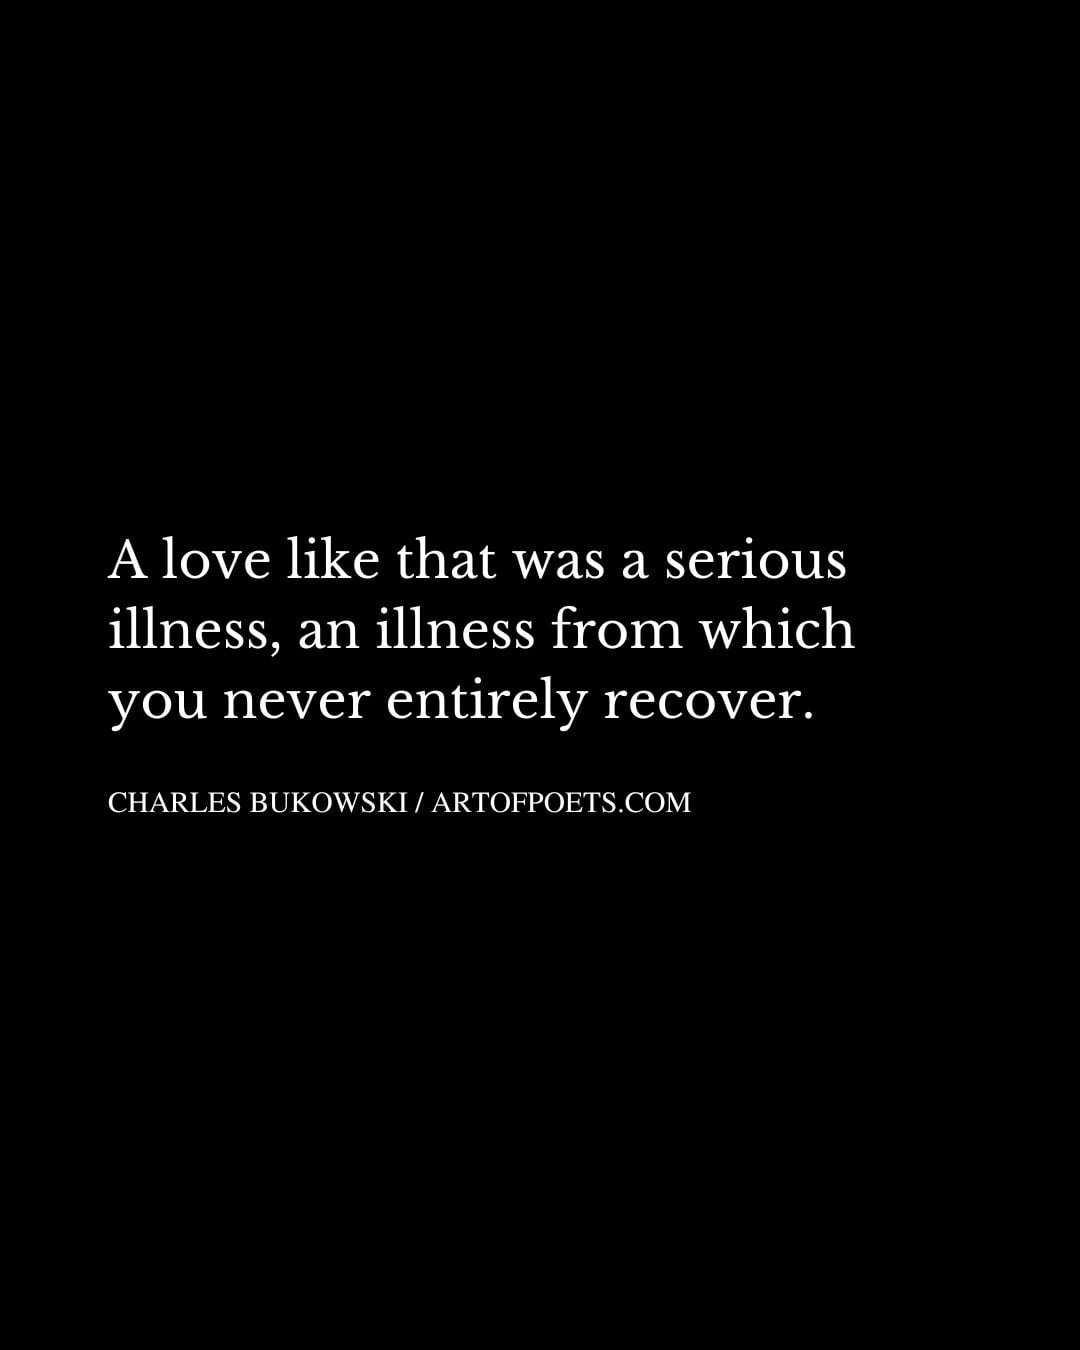 A love like that was a serious illness an illness from which you never entirely recover